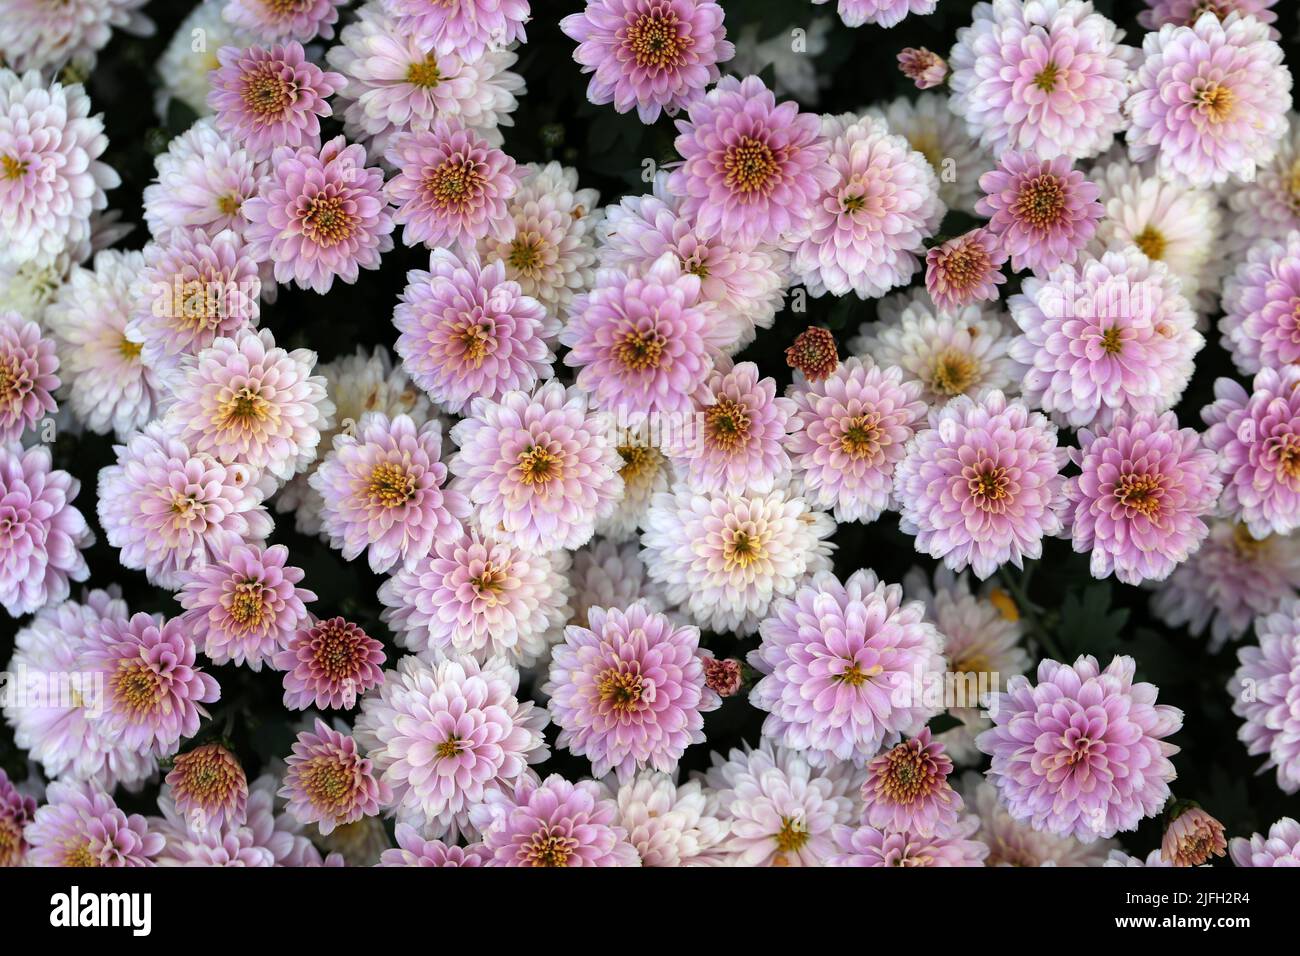 Chrysanthemum (fin: krysanteemi) flower field photographed in Finland. Plenty of beautiful light pink flowers photographed from a high angle view. Stock Photo